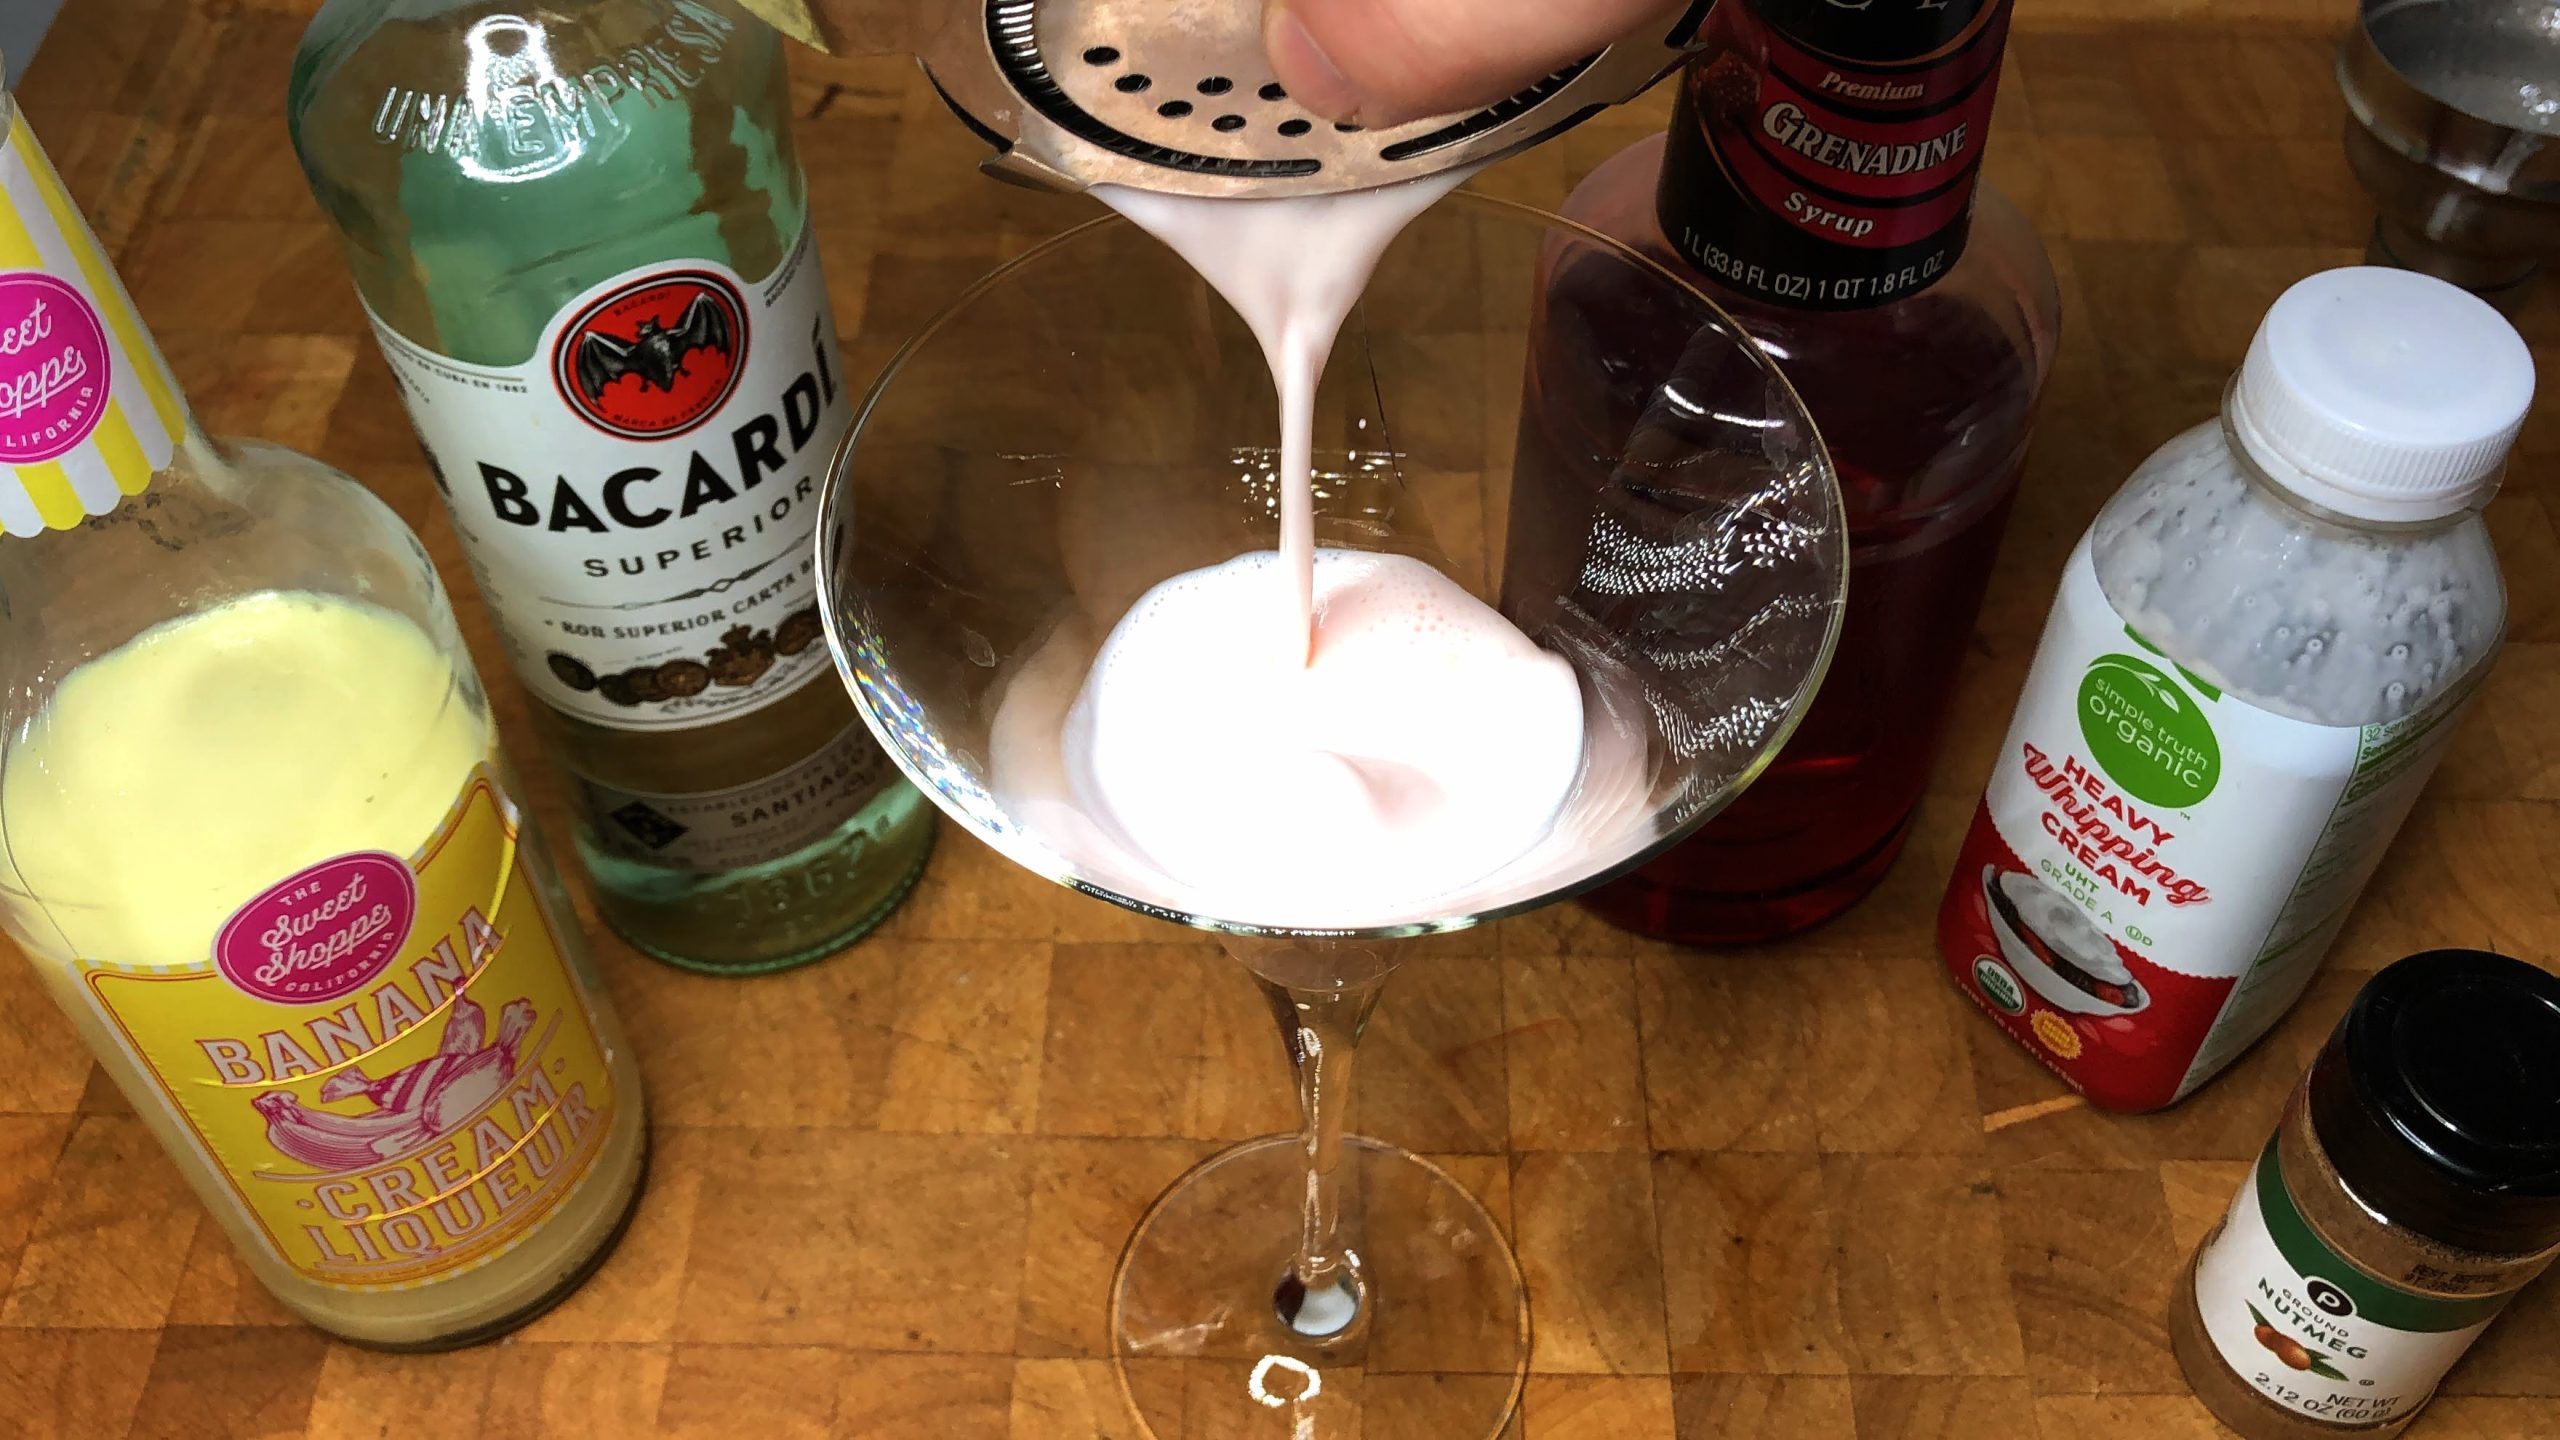 pouring banana cow cocktail into a martini glass